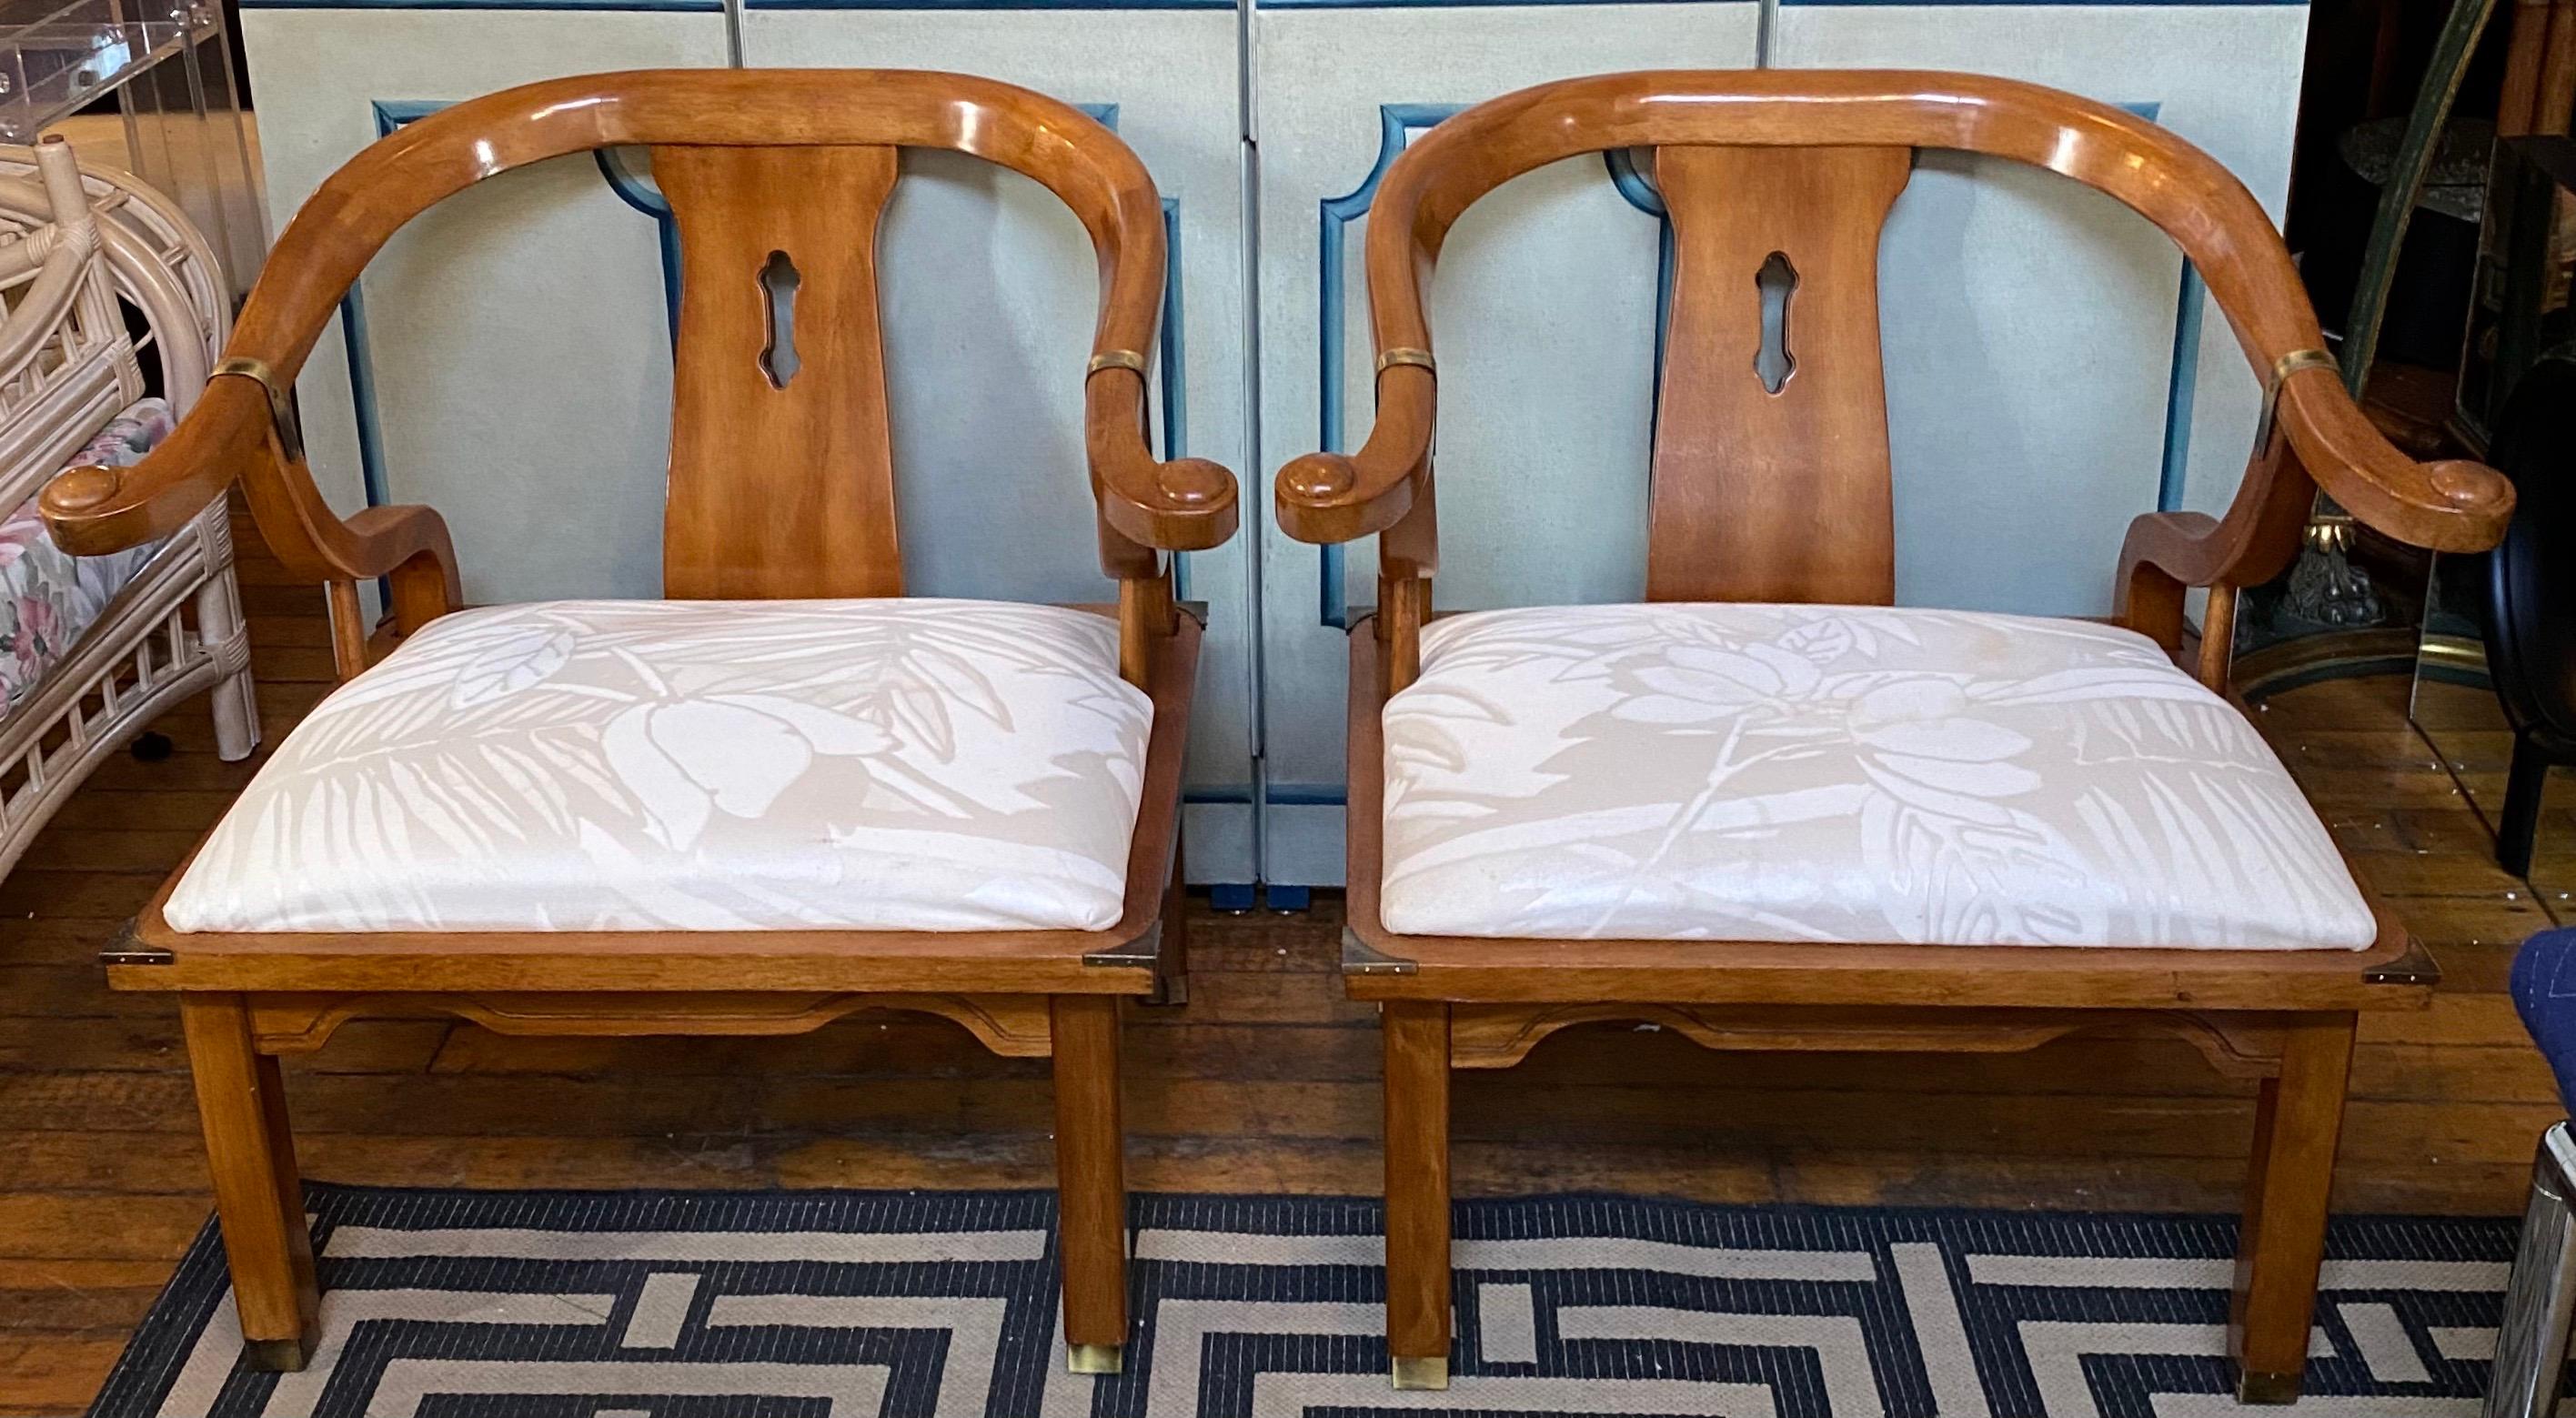 James Mont Style horseshoe Chinoiserie accent lounge chairs. These Hollywood Regency style chairs feature beautiful honey wood curved frames with brass hardware accents and upholstered seats. Very solidly and sturdy construction.
Priced per chair.